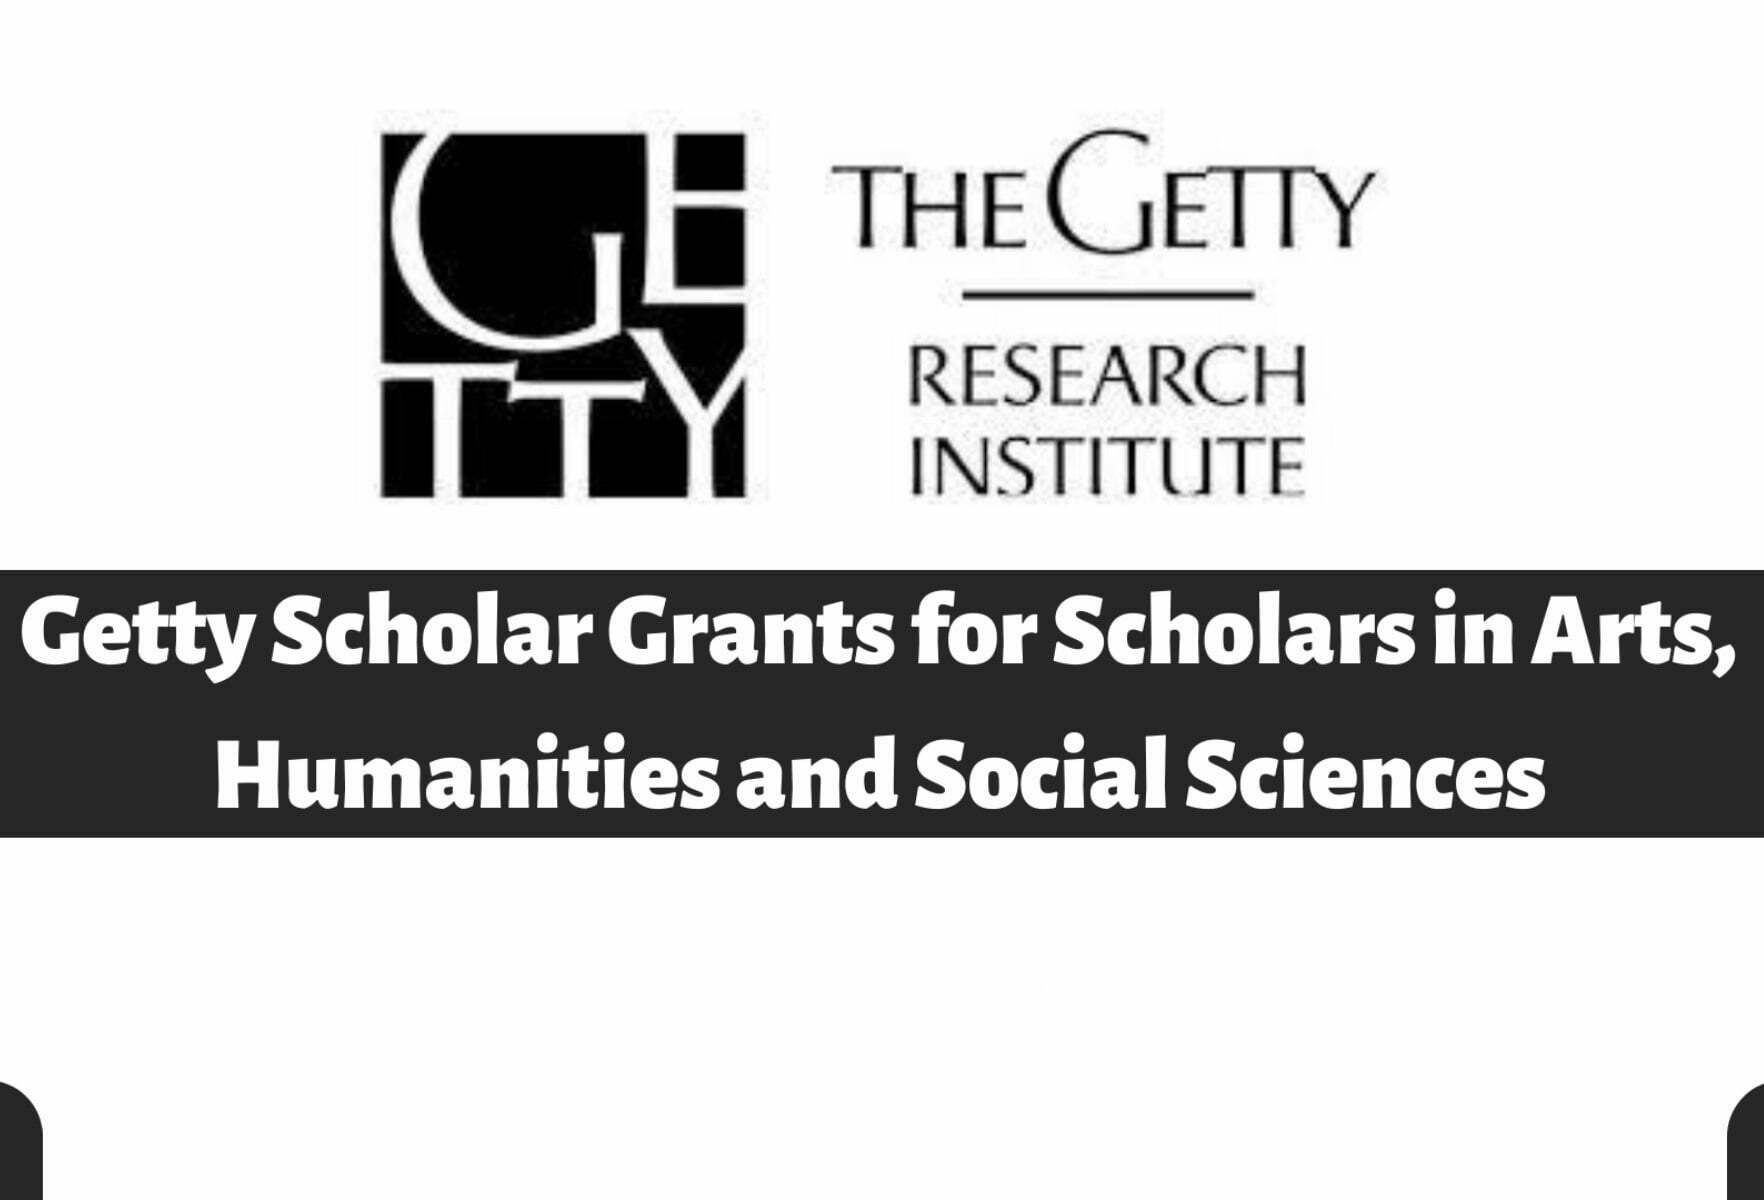 Getty Scholar Grants 2023 for Scholars in Arts, Humanities and Social Sciences